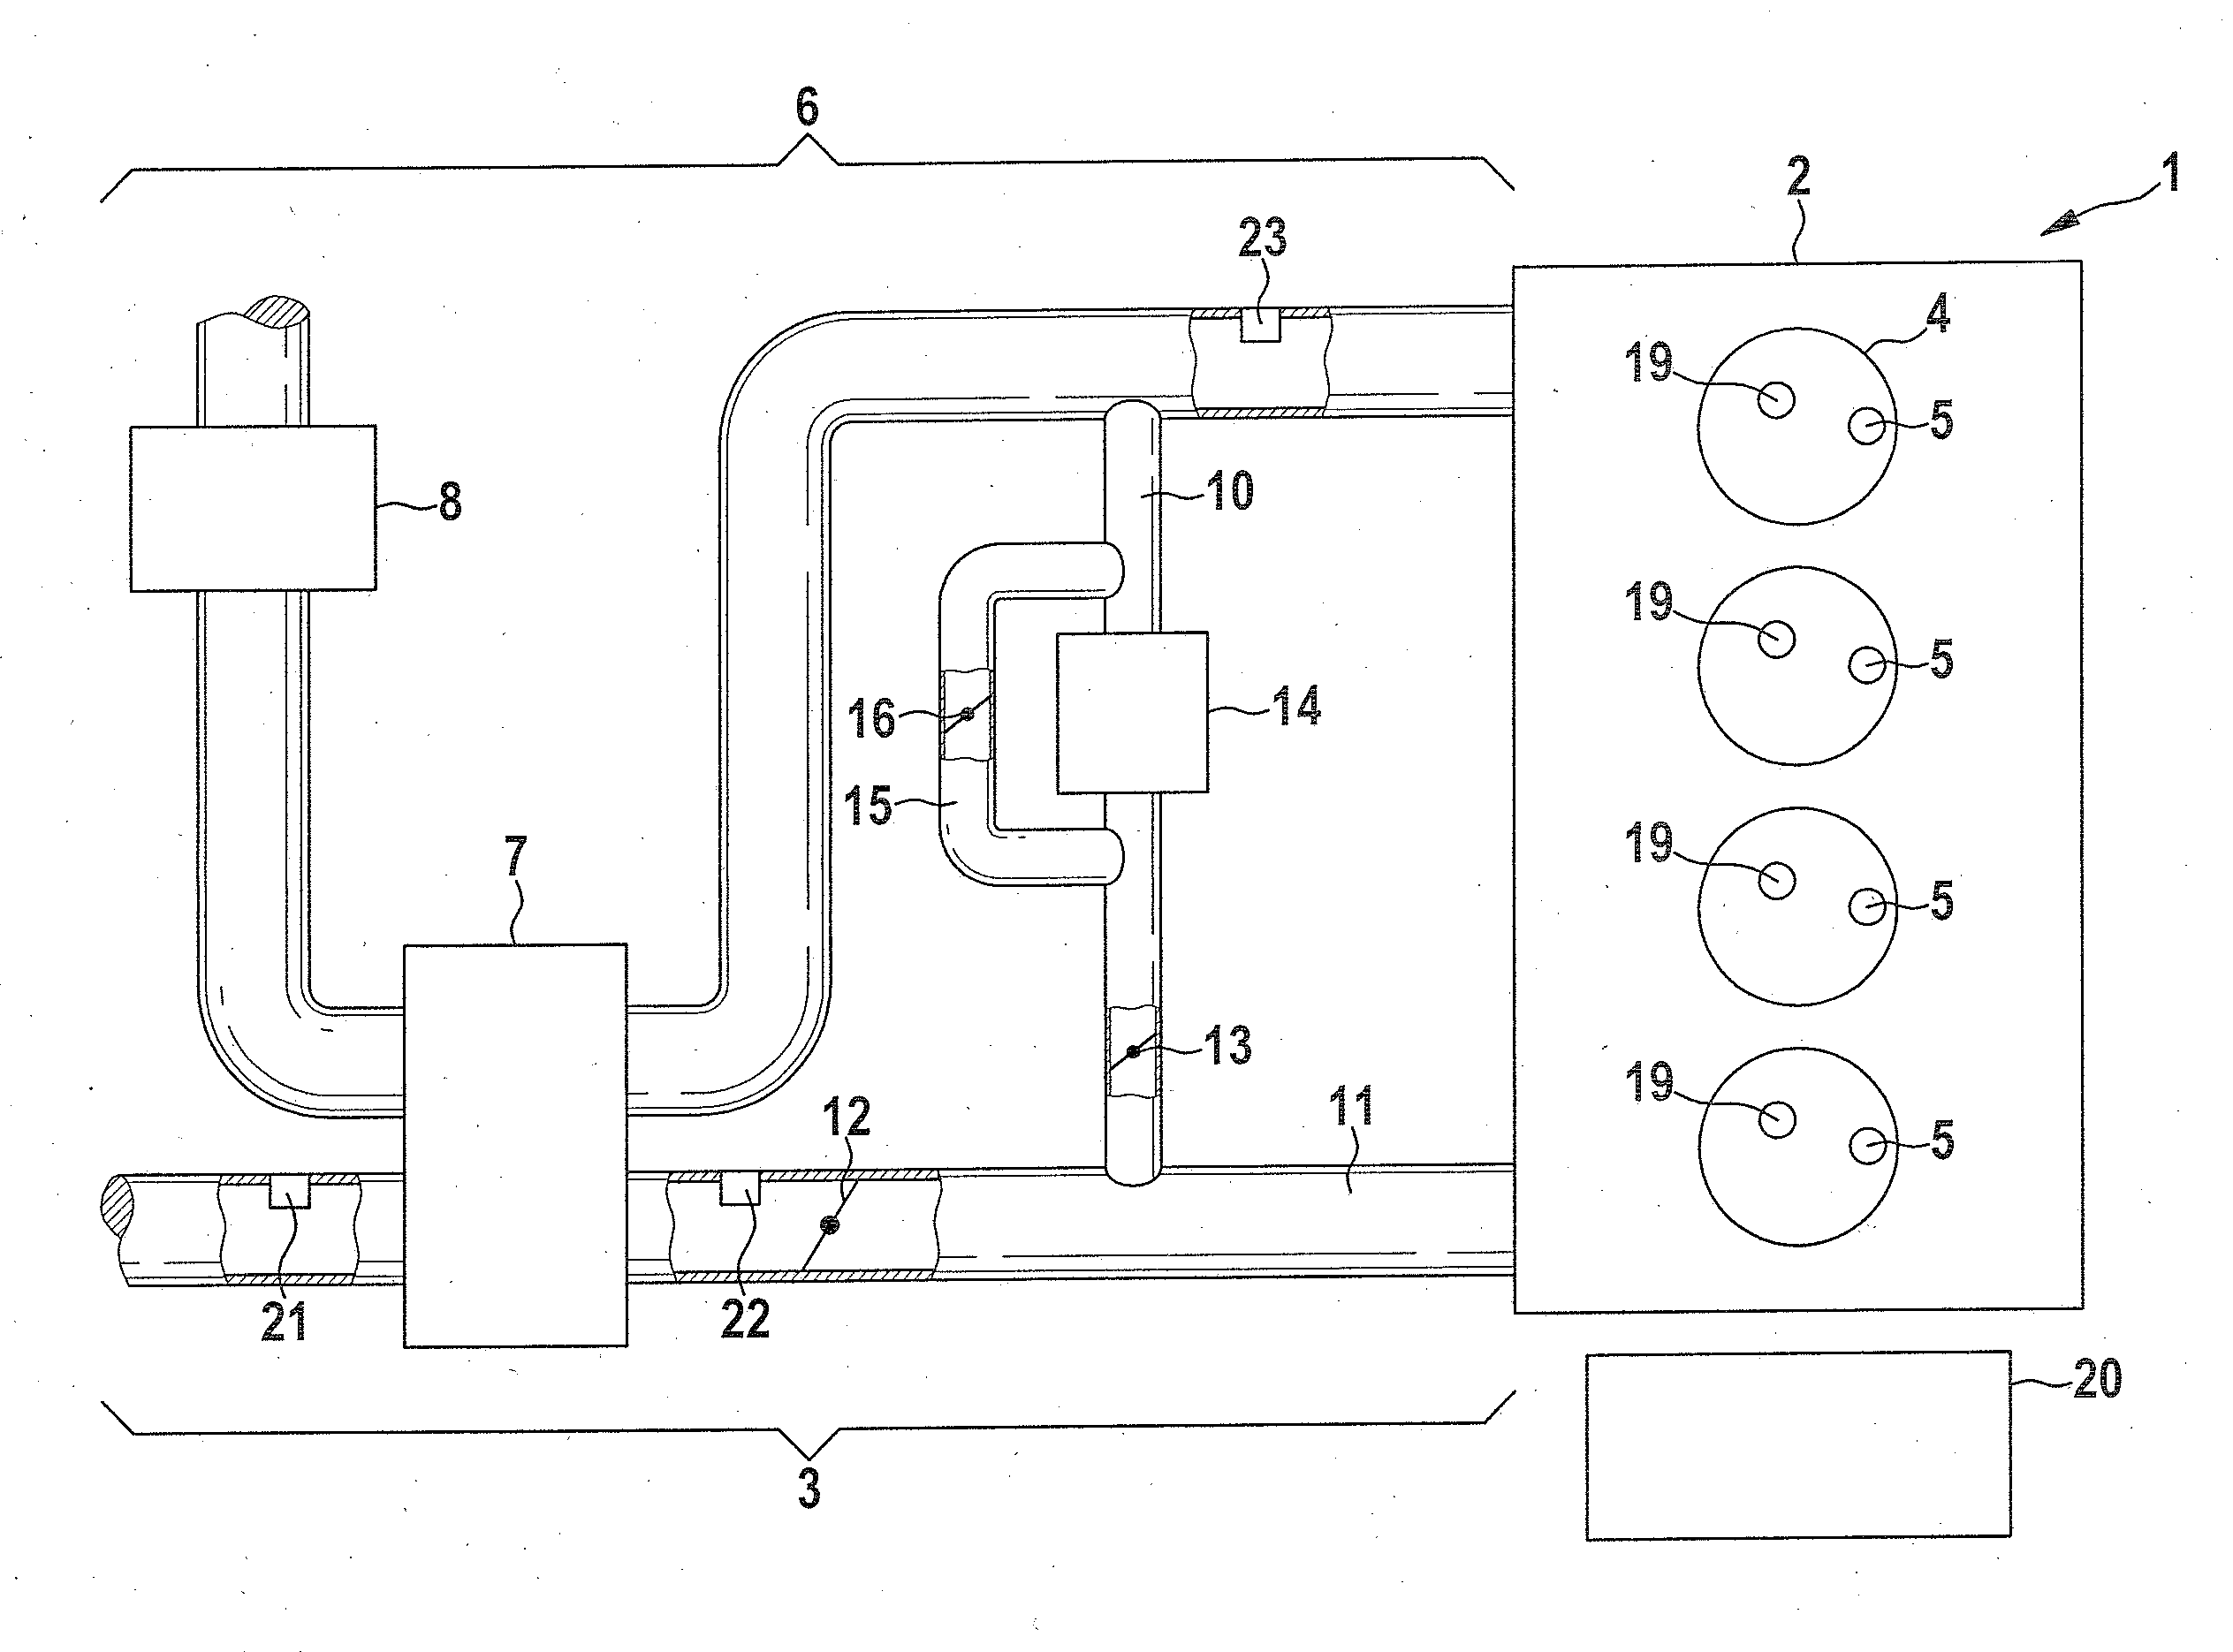 Method and apparatus for determining and regulating an exhaust gas recirculation rate of an internal combustion engine